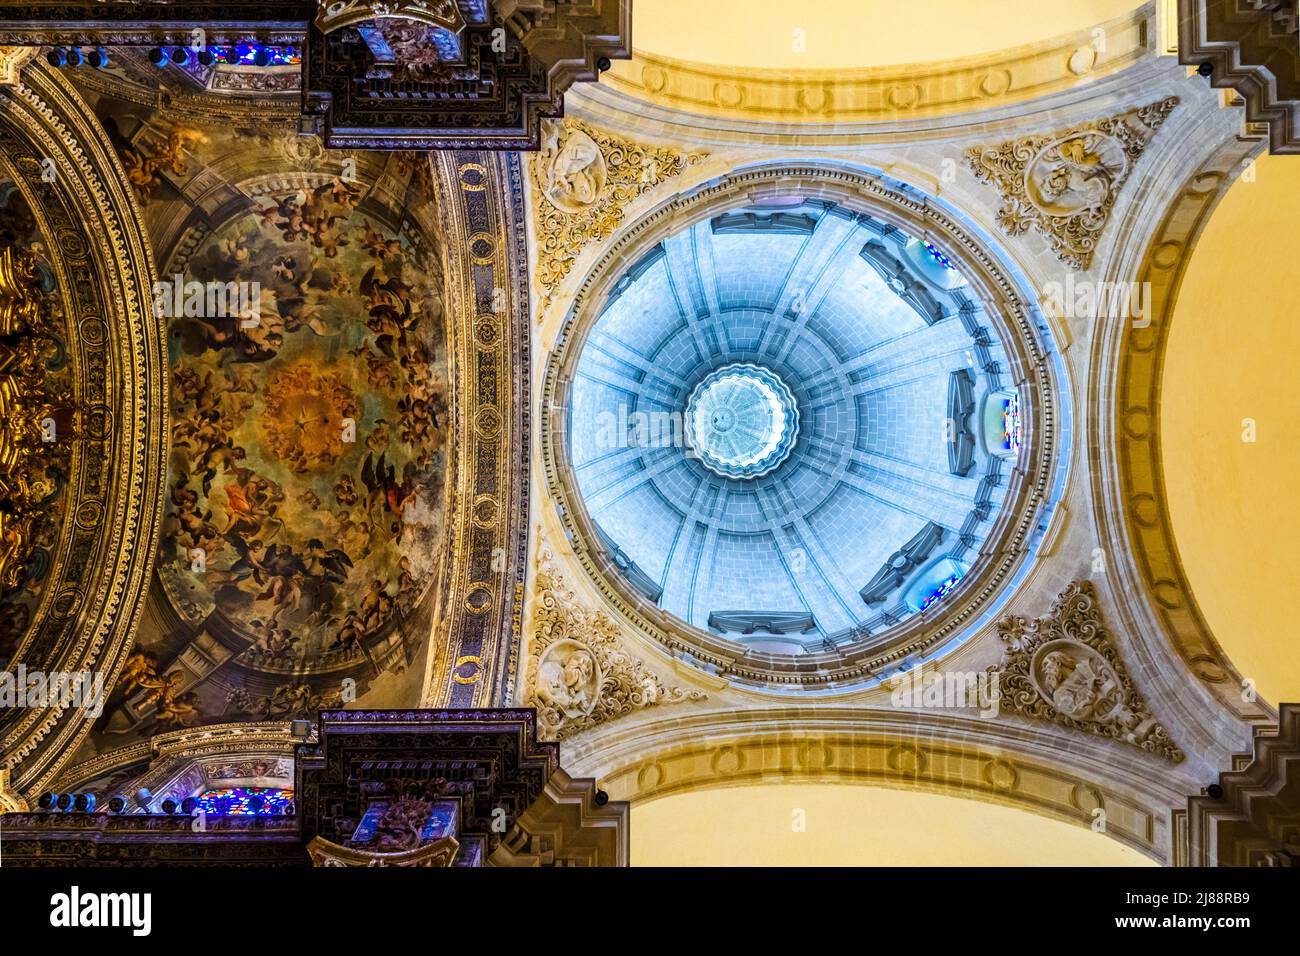 The main chapel dome and its vaulted ceiling painted by Juan Espinal in the 18th century with a rapresentation of the Celestial Glory presided over by the Holy Spirit in the form of a dove - Collegiate Church of the Divine Savior - Seville, Spain Stock Photo